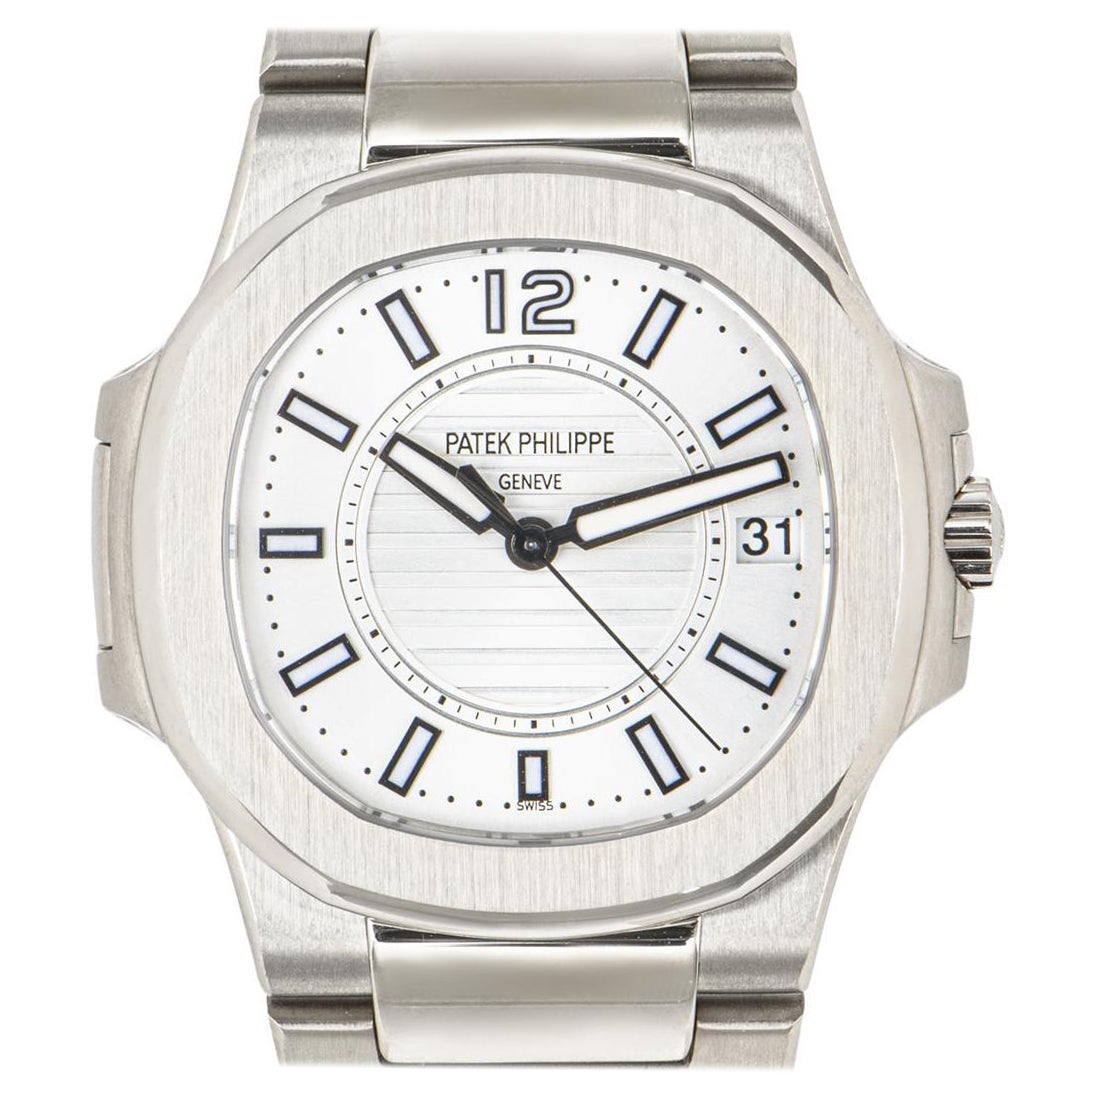 A one time owner 32mm Nautilus in white gold by Patek Philippe. Featuring a silver dial with a date display at 3 o'clock. The bracelet comes equipped with a concealed double deployant clasp. Fitted with sapphire crystal and a quartz movement.

The